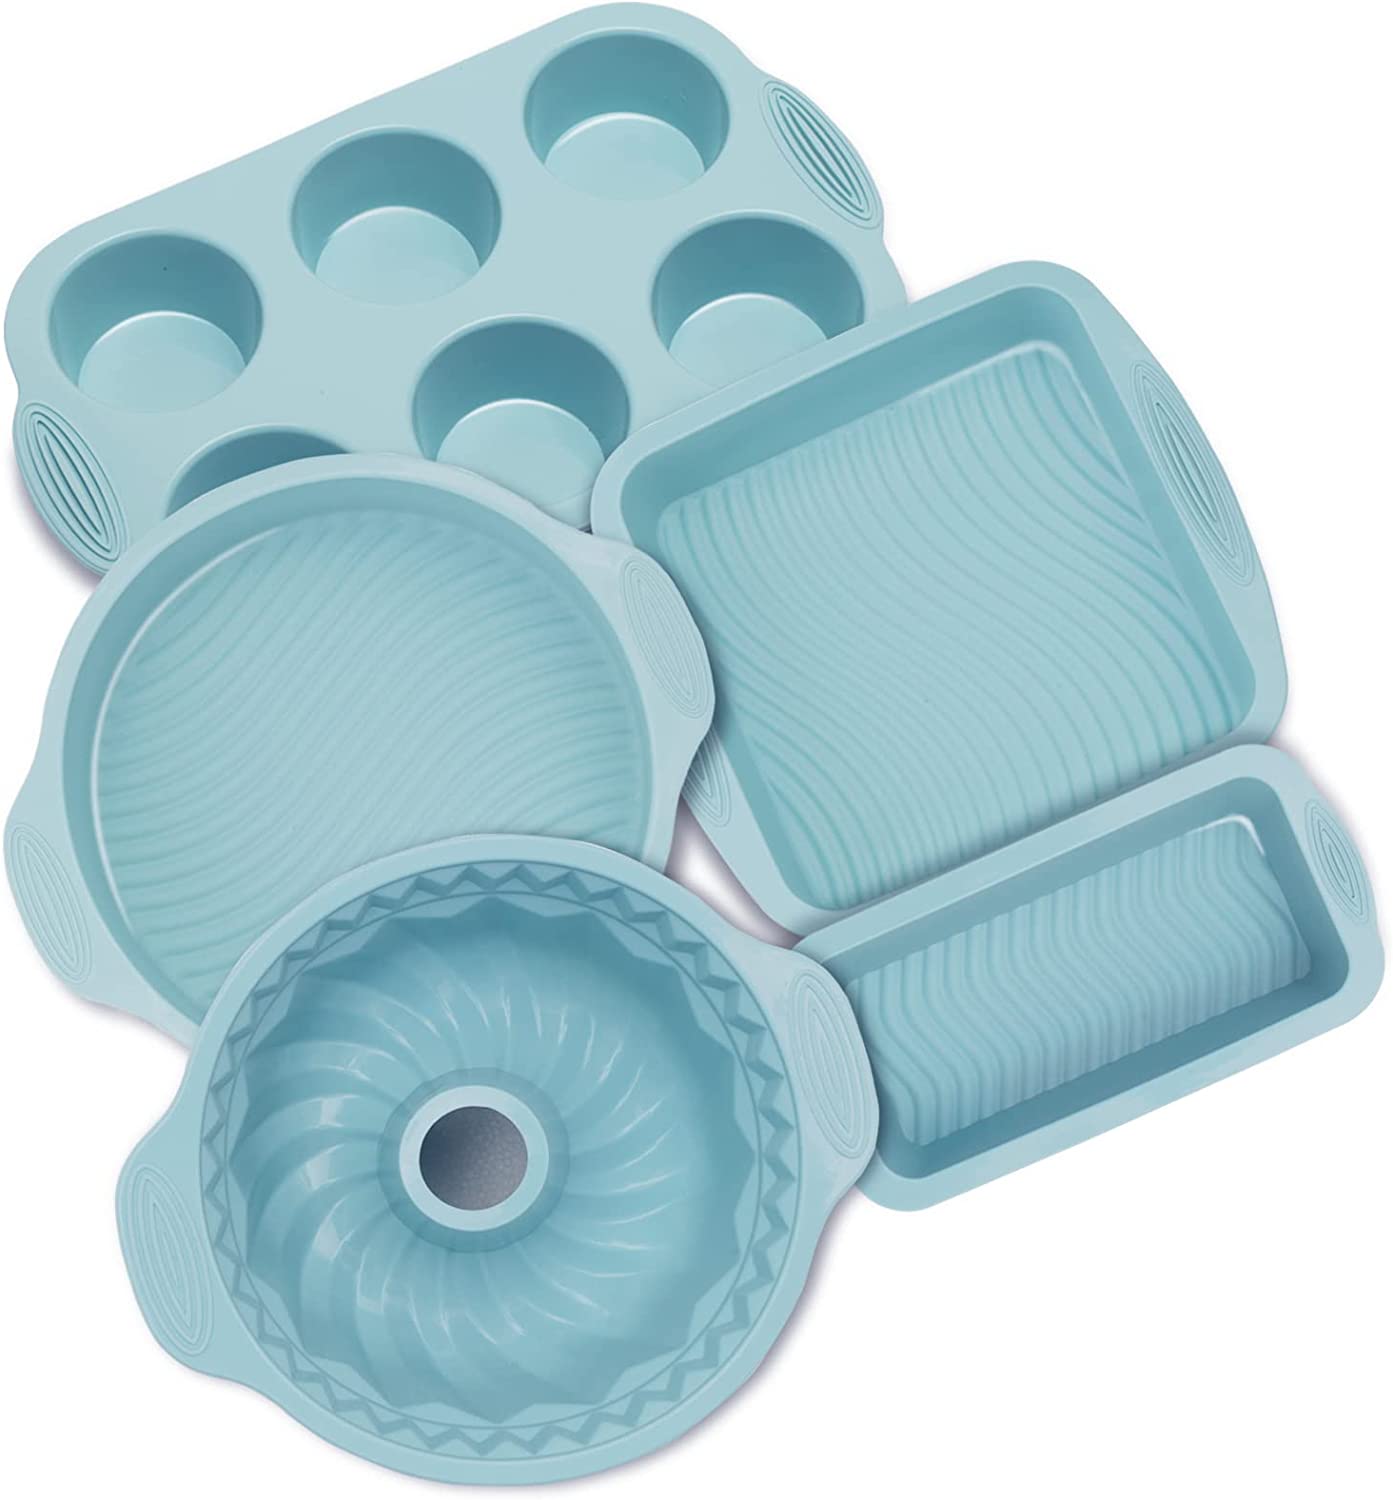 Nonstick Silicone Bakeware Set Silicone Cake Molds Set For Baking